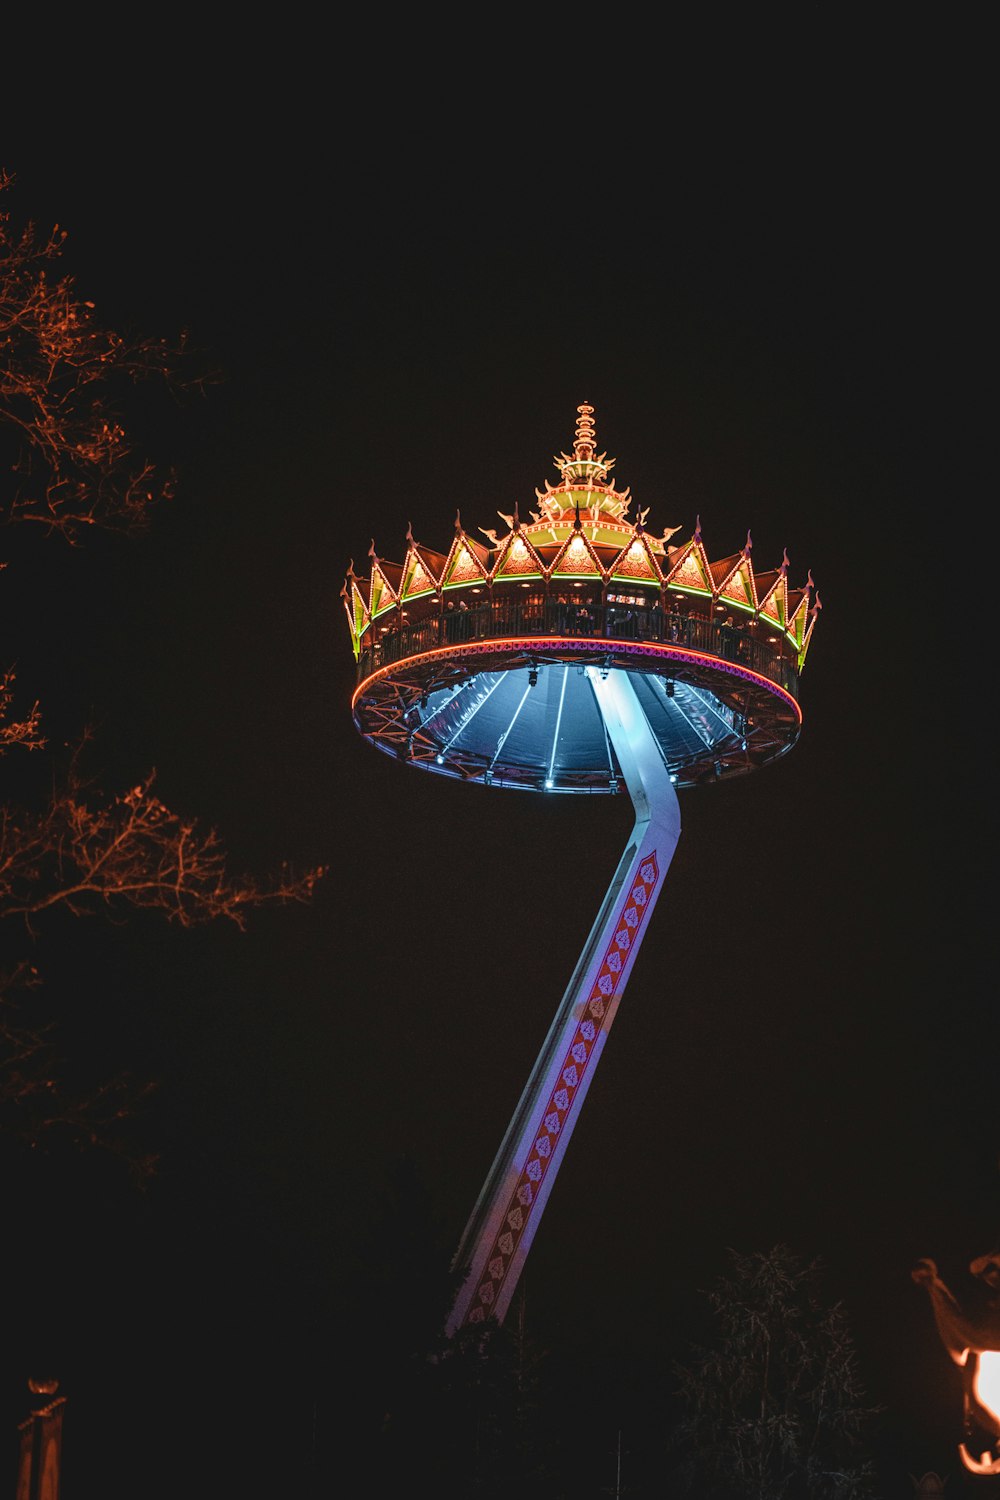 a carnival ride lit up at night in the dark